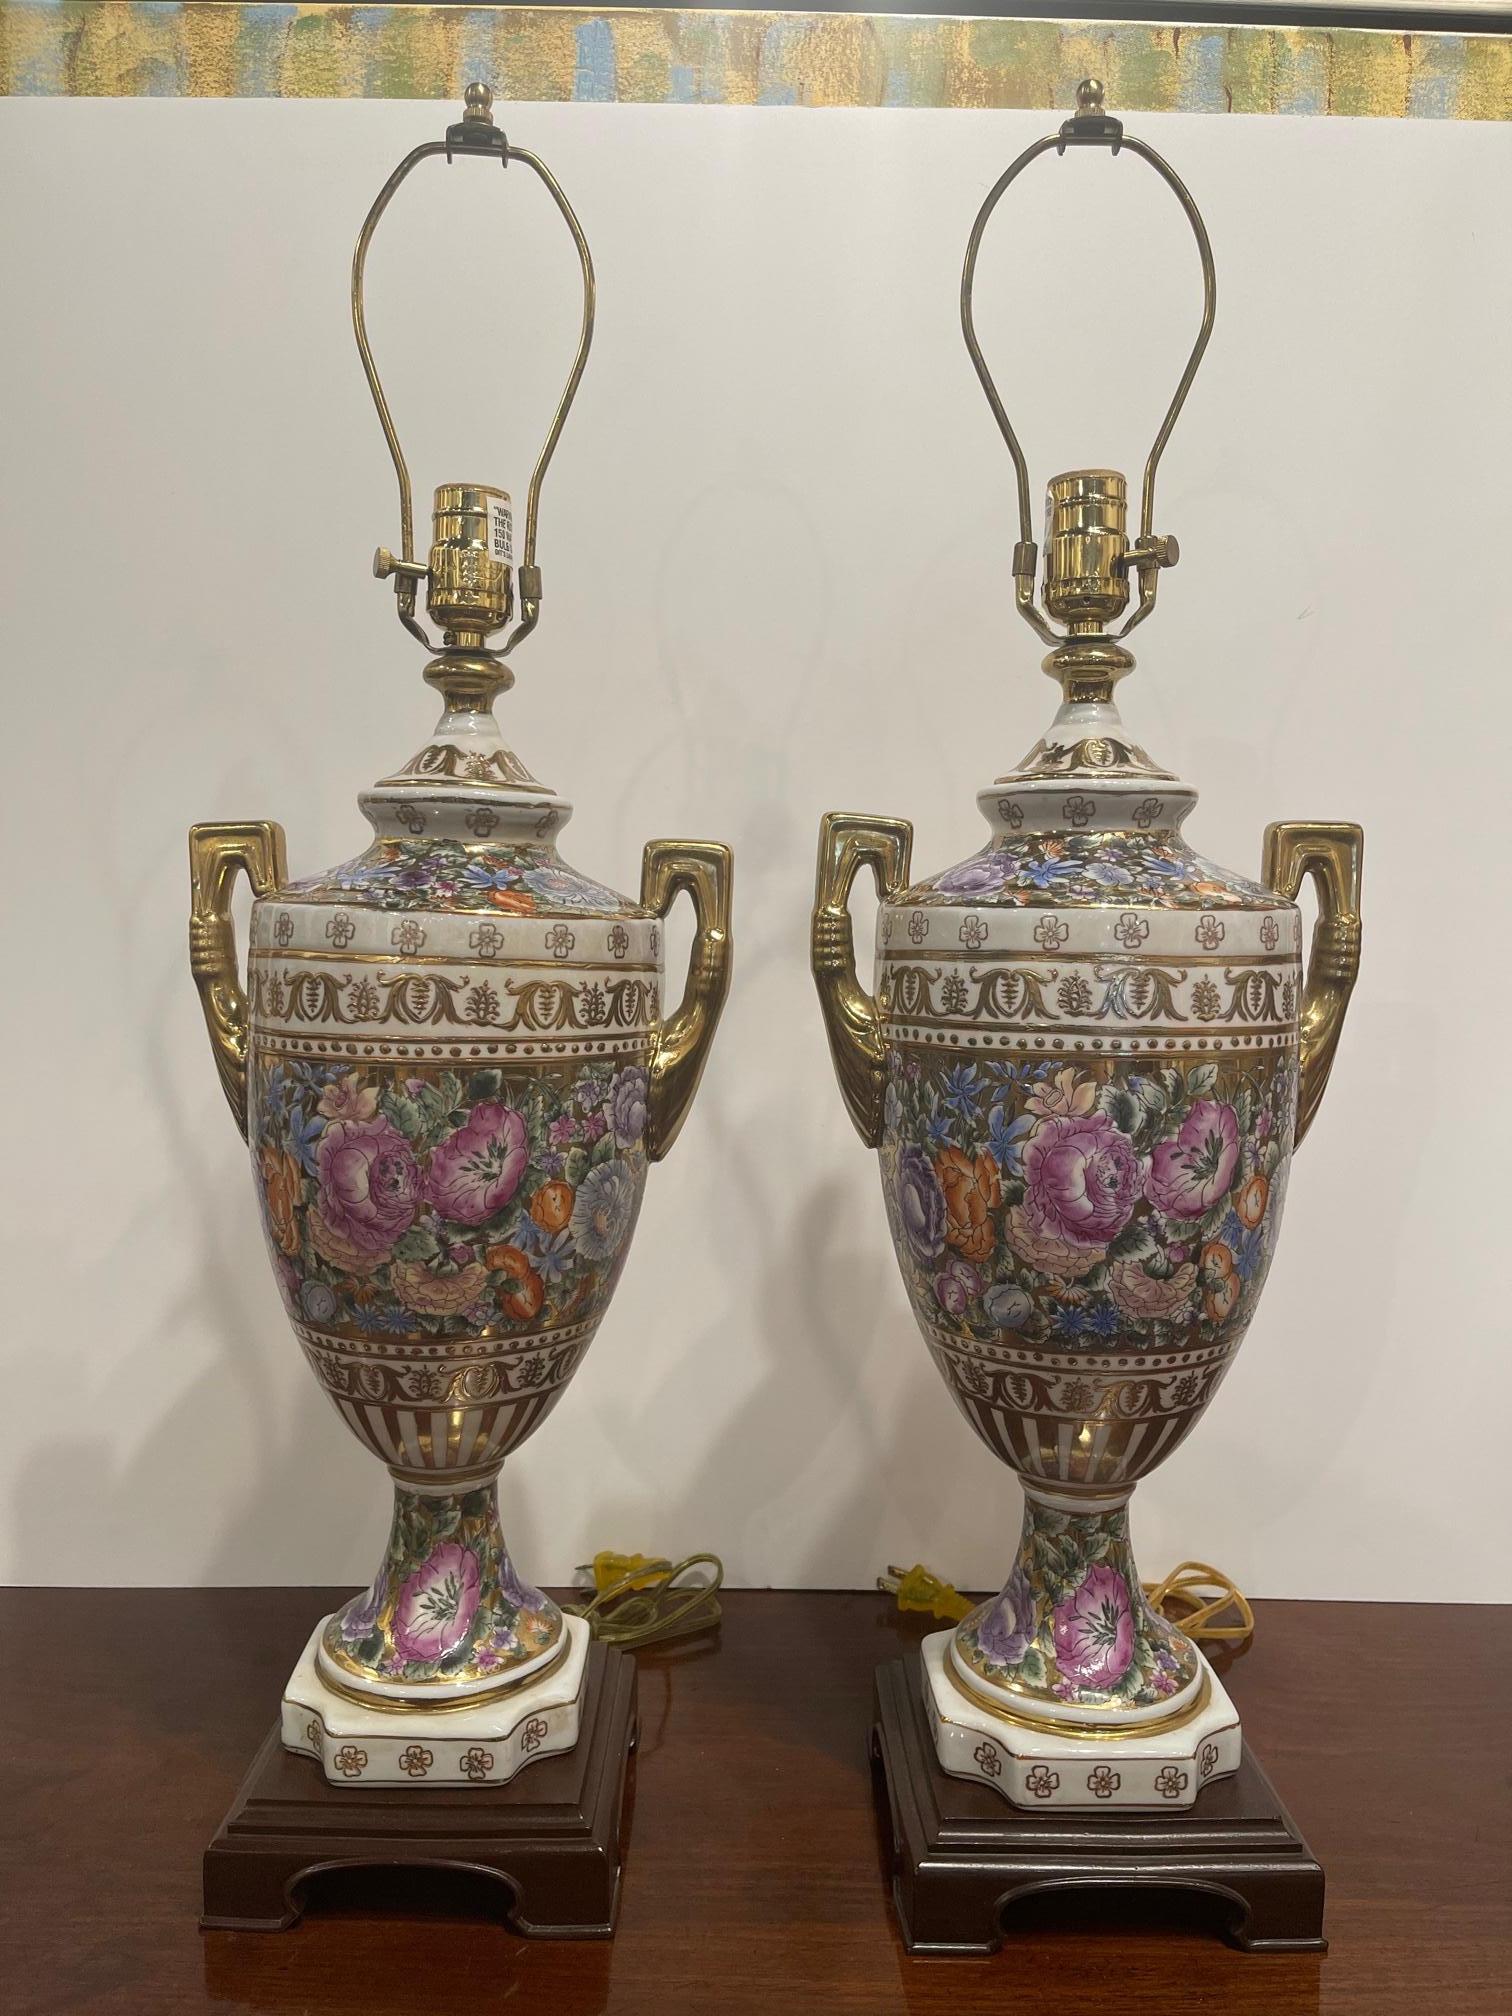 Pair of porcelain floral and gold trim vases with handles adapted as lamps, 20th Century.